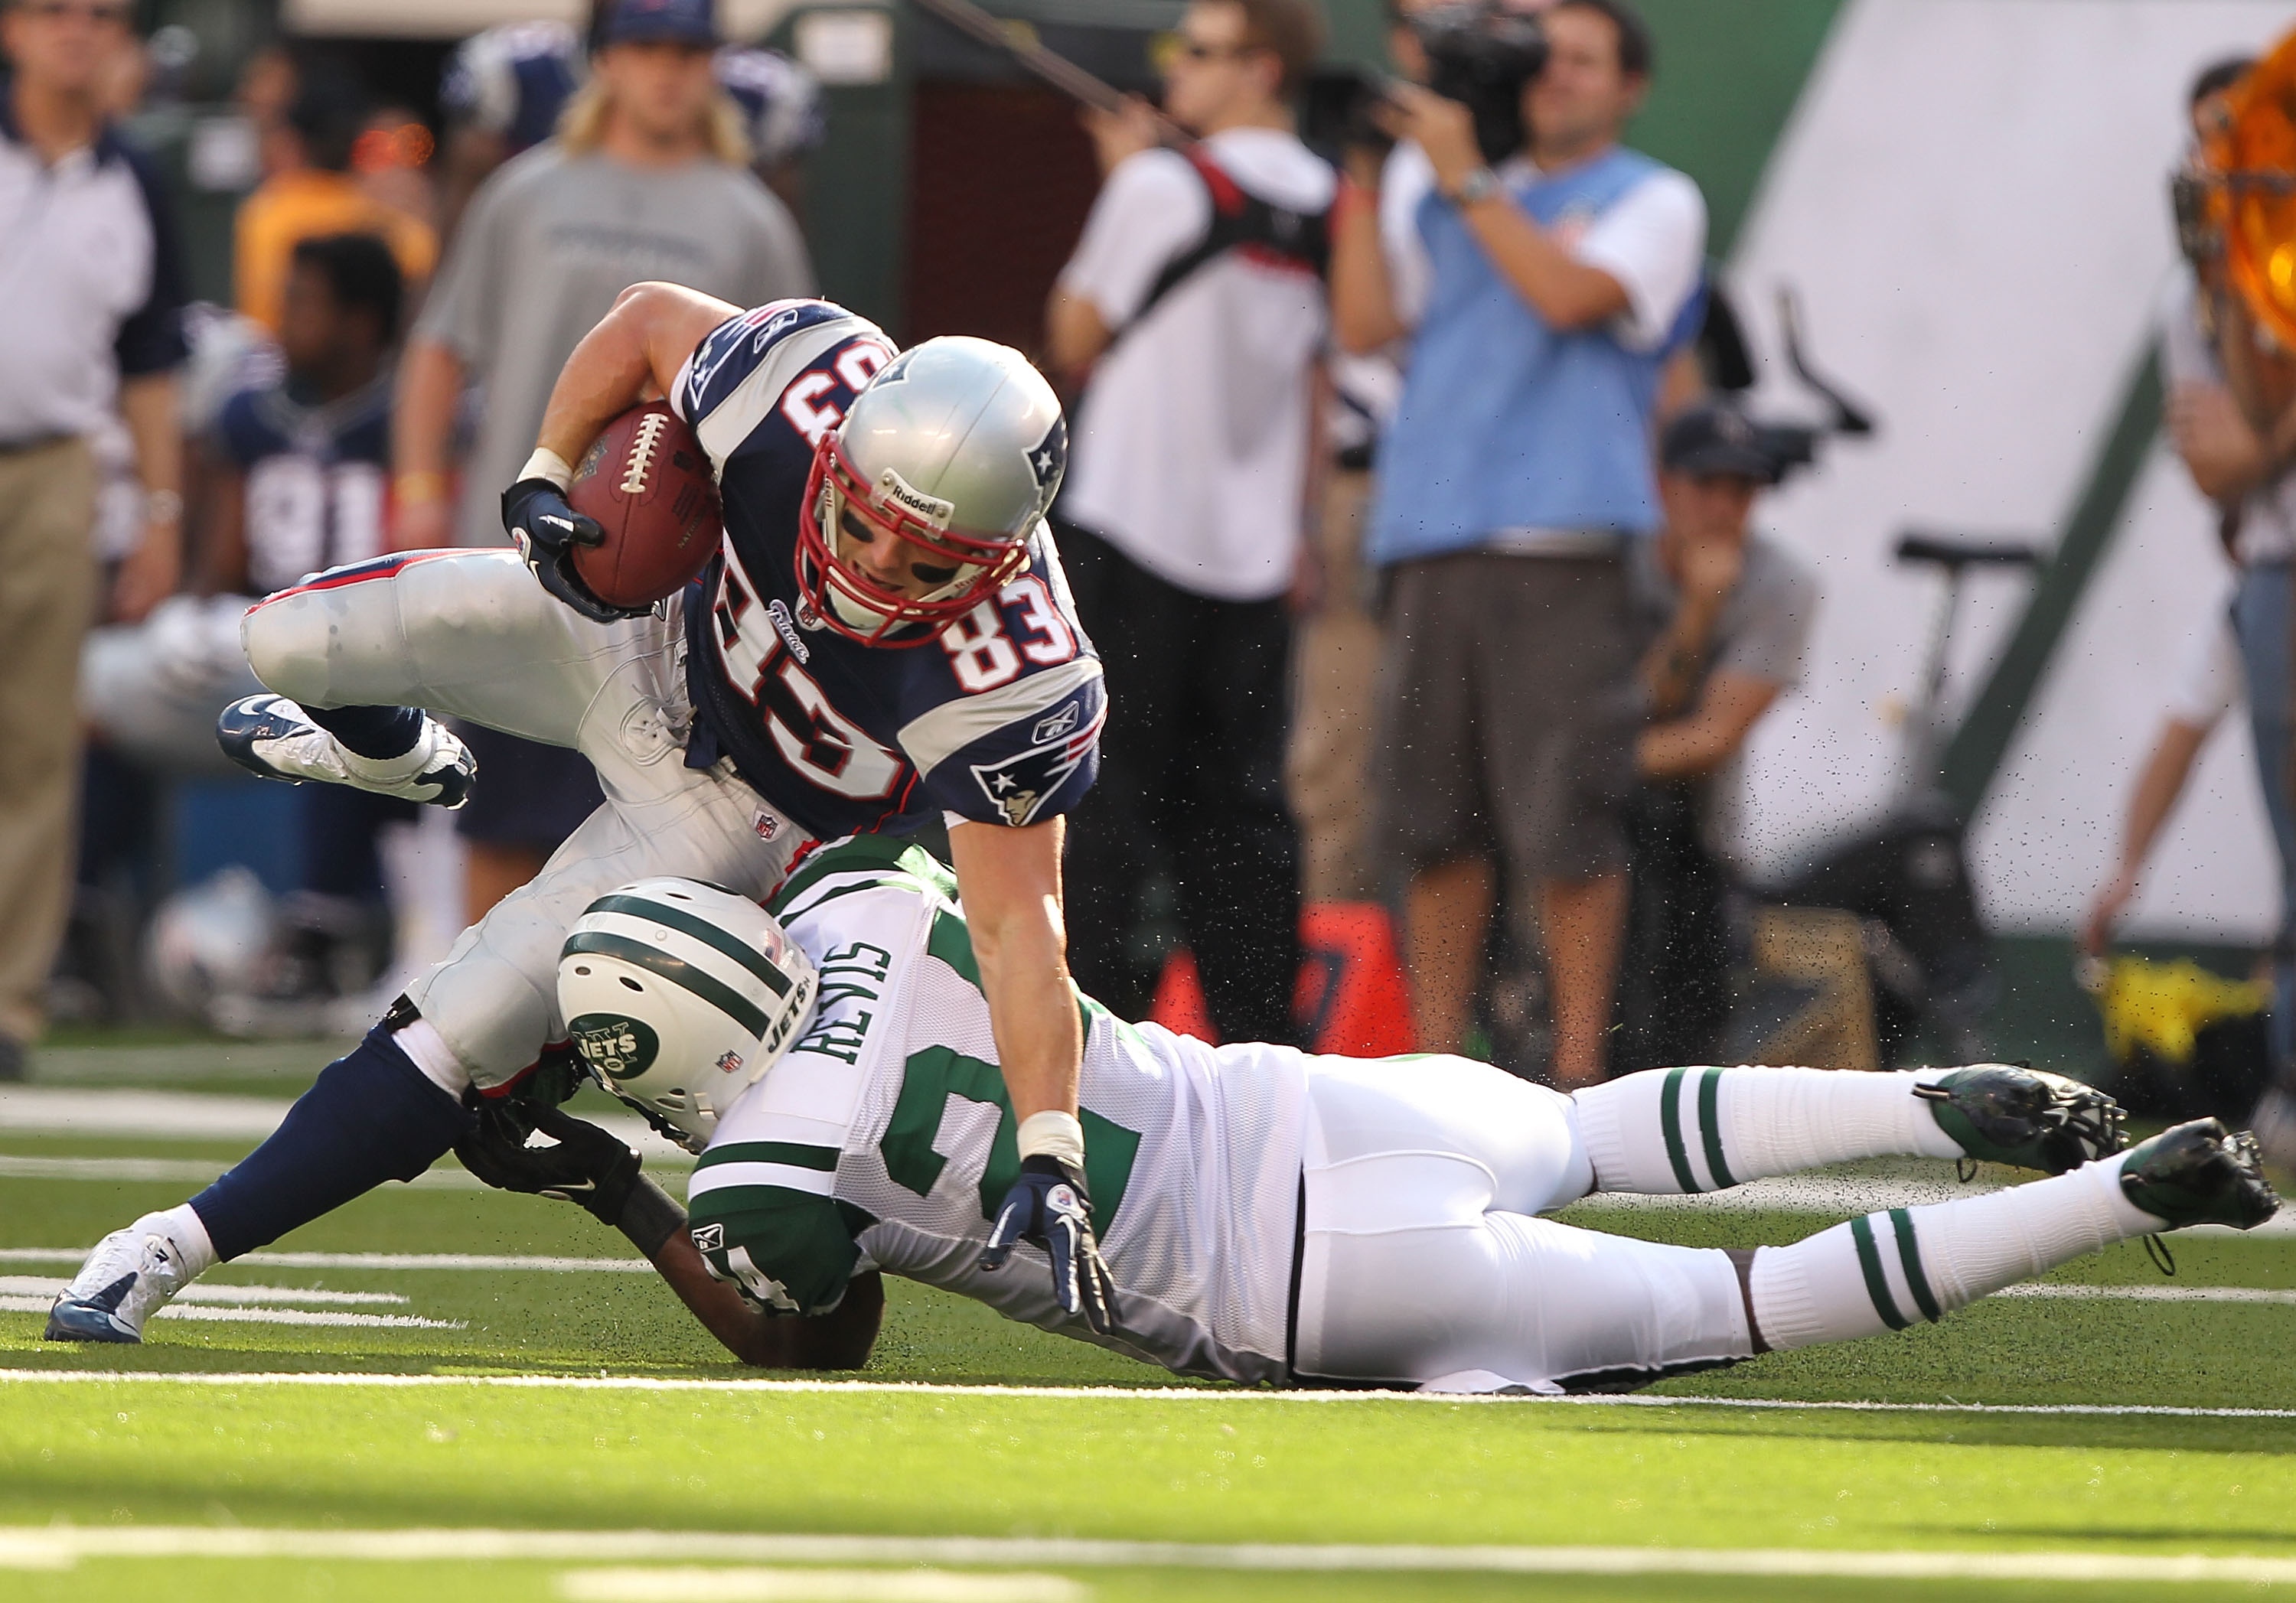 EAST RUTHERFORD, NJ - SEPTEMBER 19:  Darrelle Revis #24 of the New York Jets tackles Wes Welker #83 of the New England Patriots during their  game on September 19, 2010 at the New Meadowlands Stadium  in East Rutherford, New Jersey.  (Photo by Al Bello/Ge